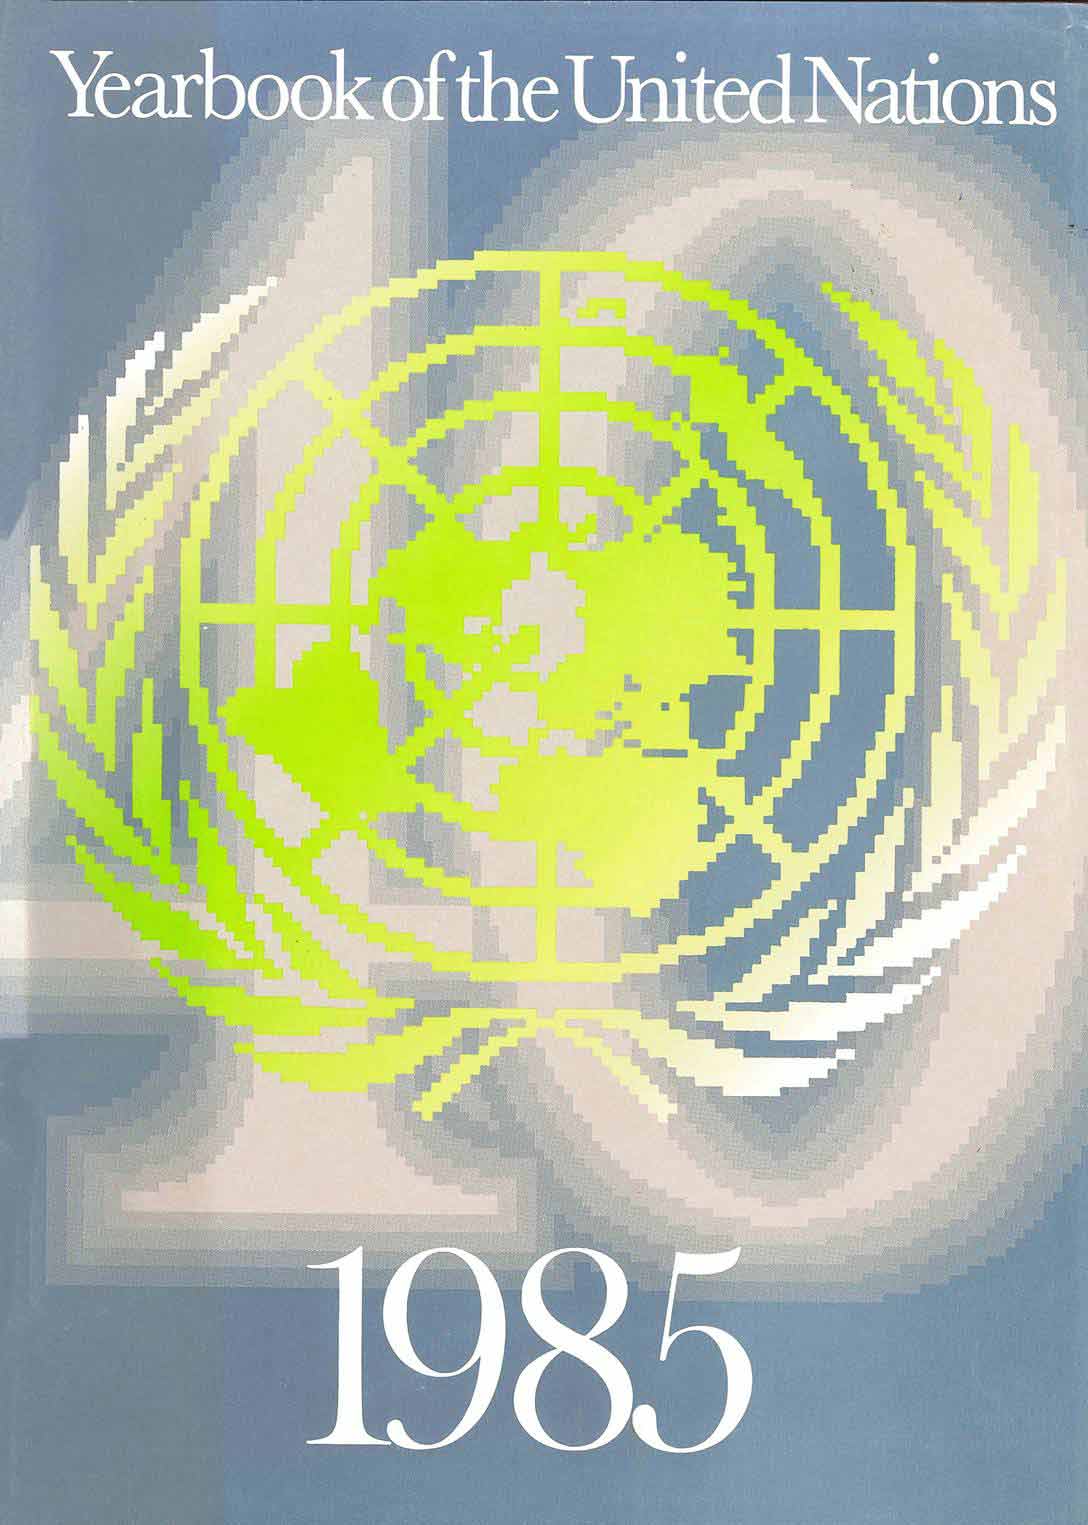 image of Food and Agriculture Organization of the United Nations (FAO)